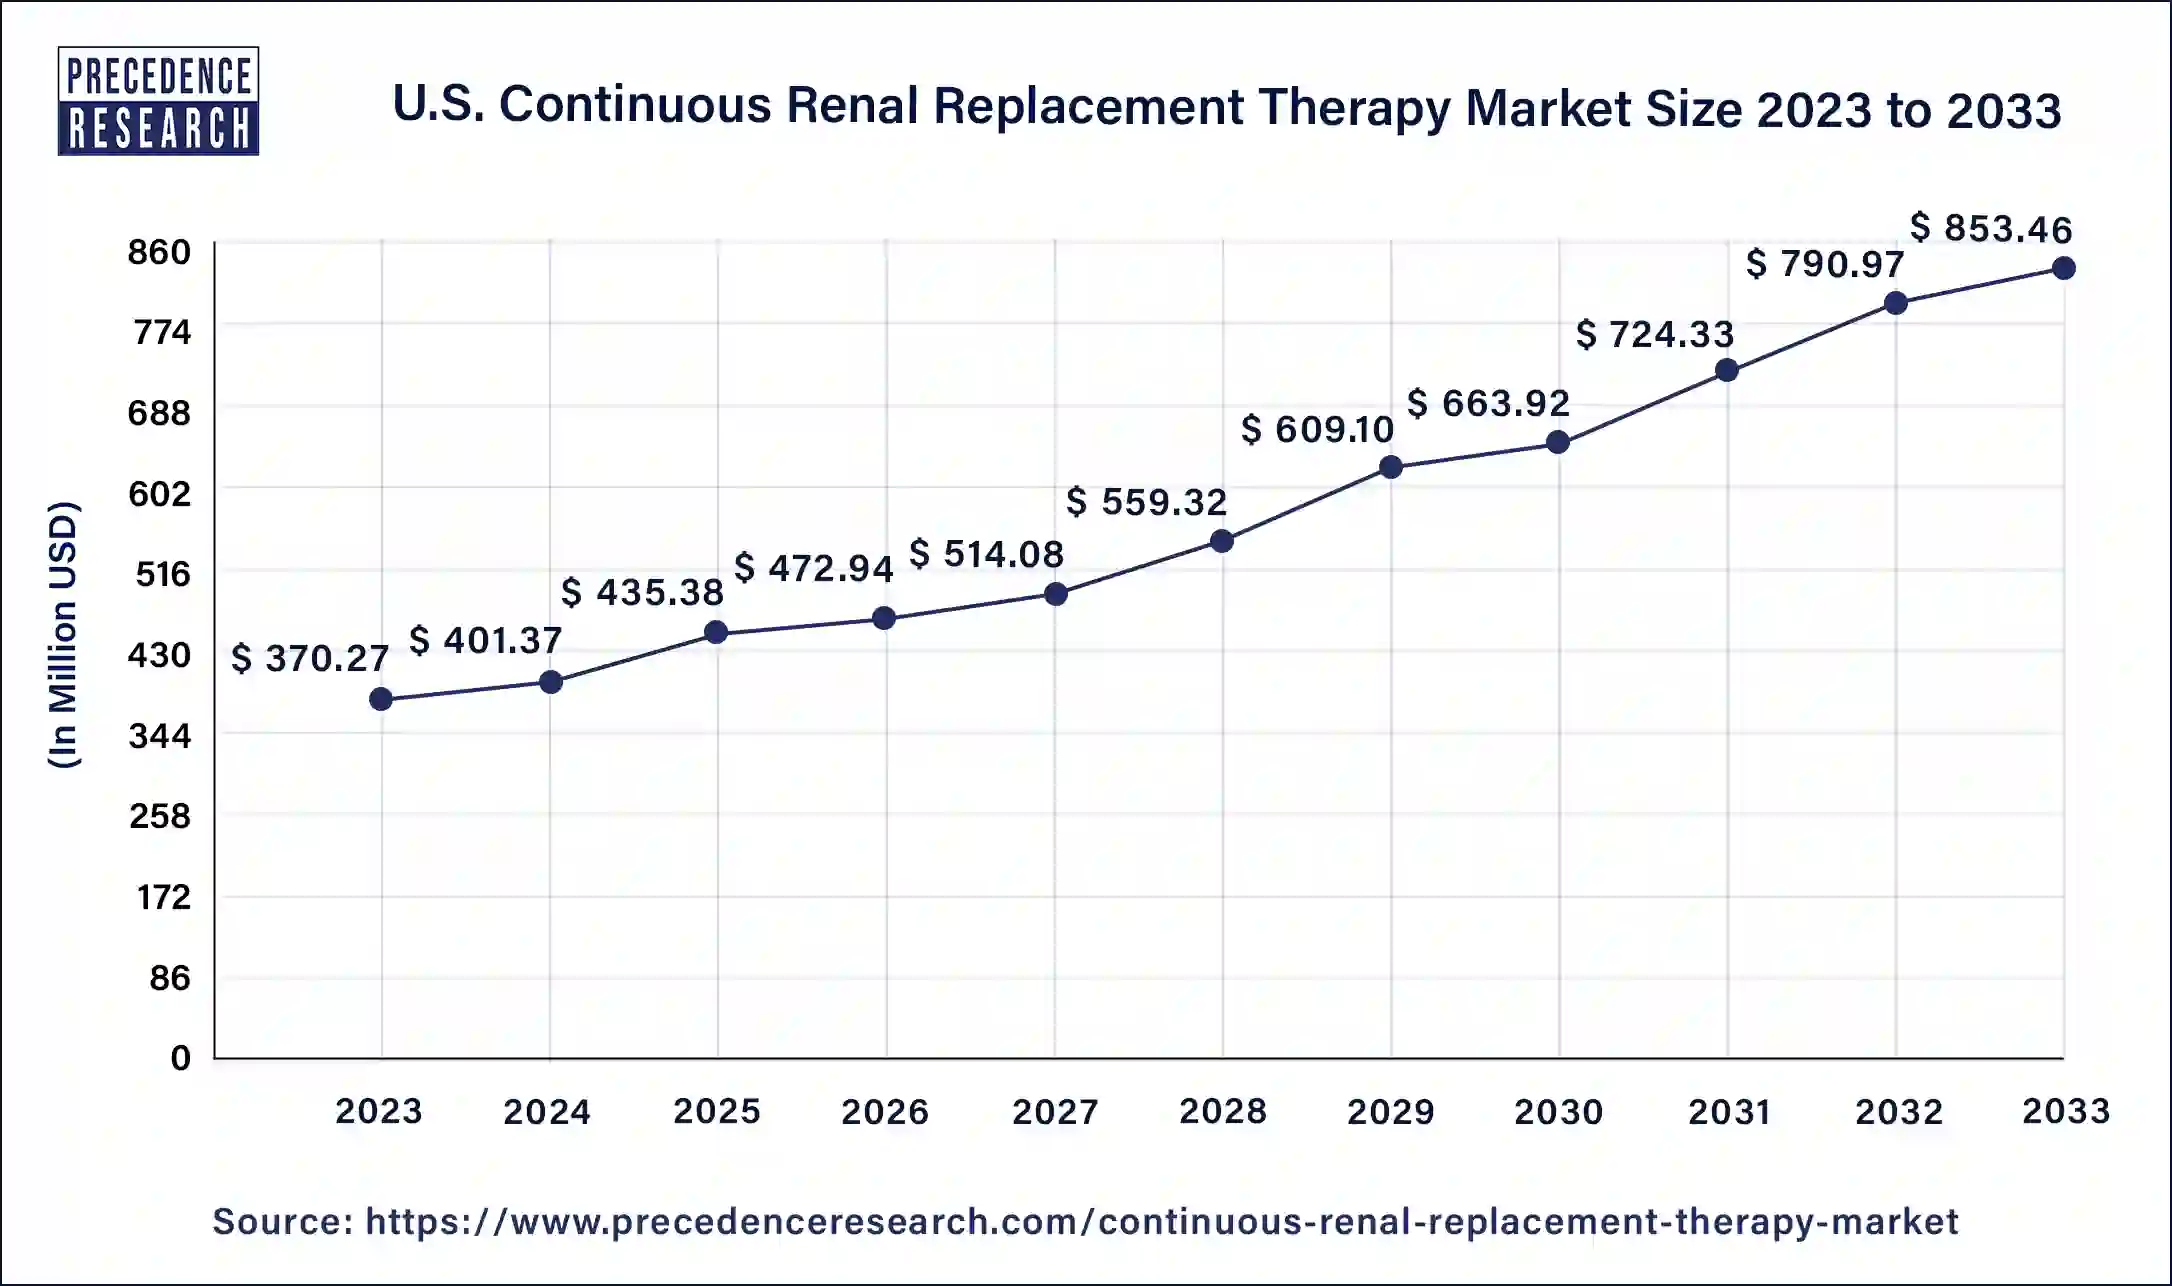 U.S. Continuous Renal Replacement Therapy Market Size 2024 to 2033